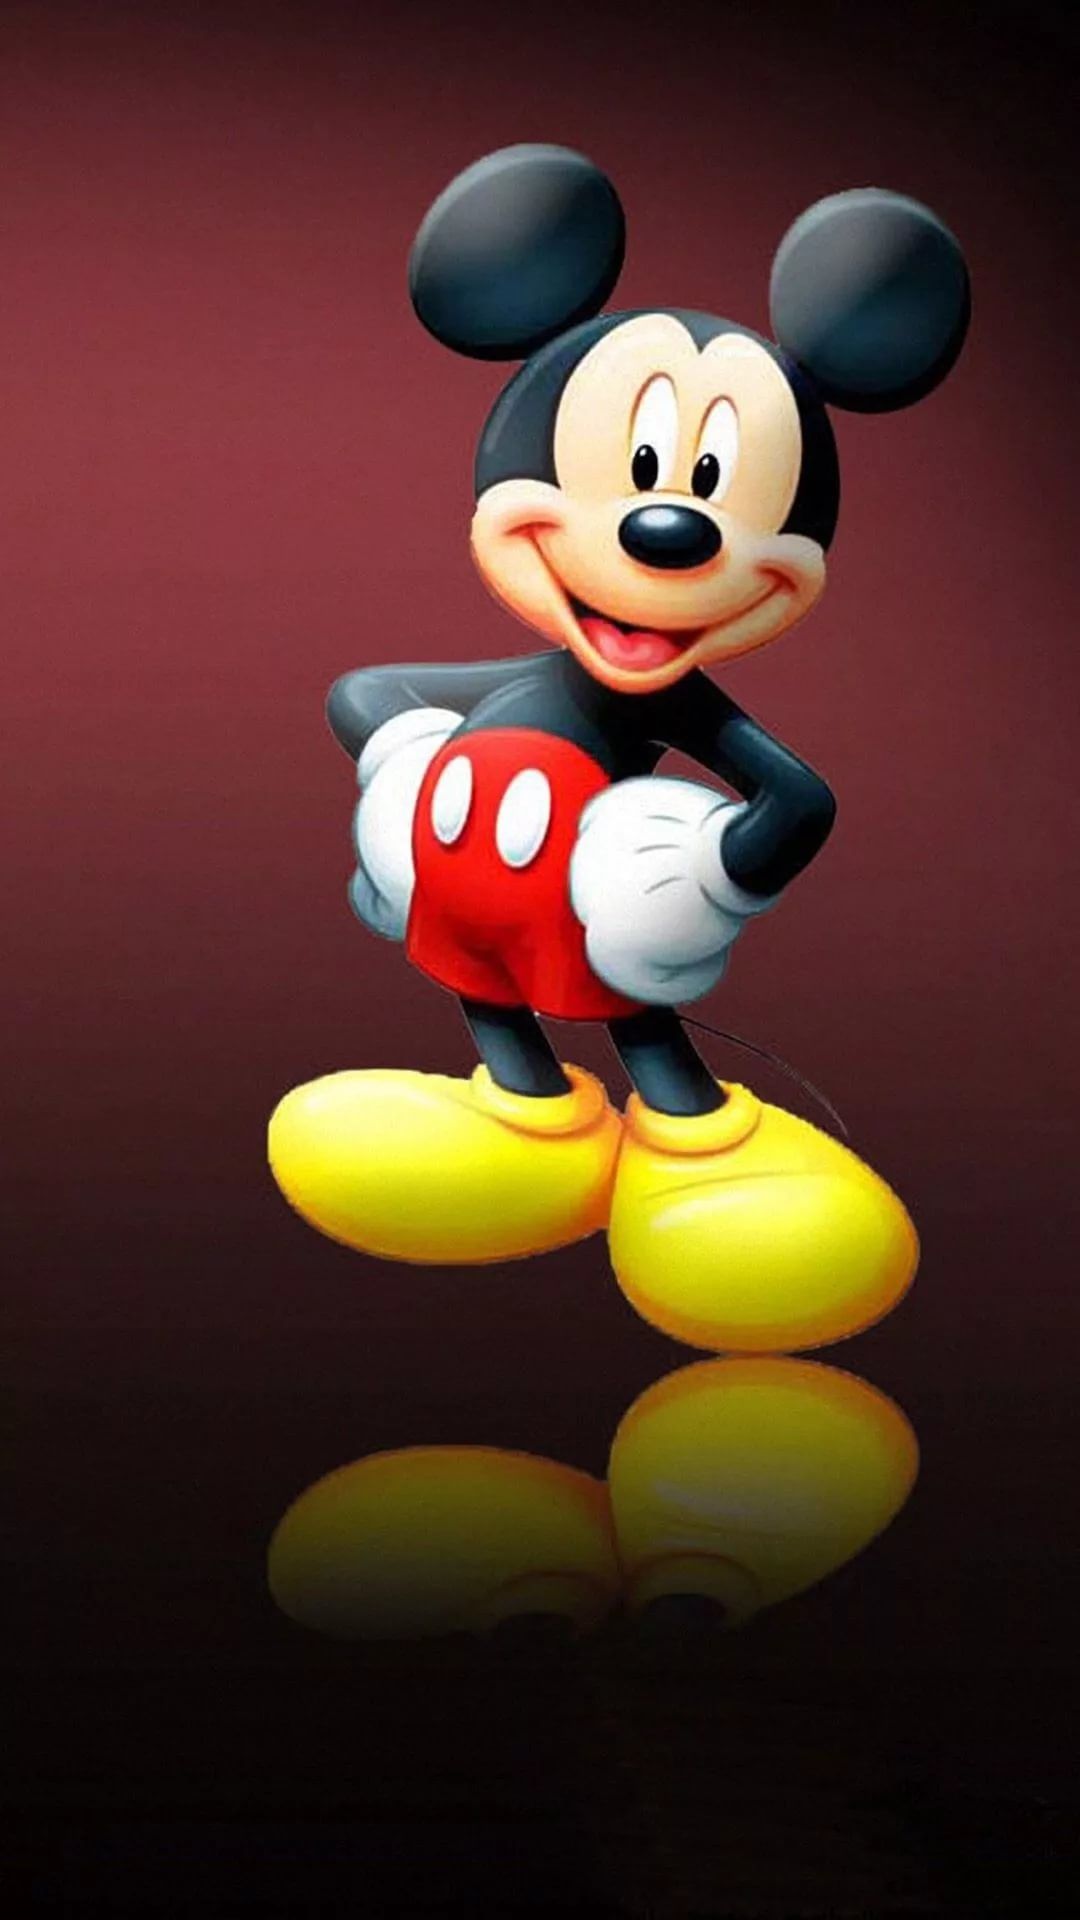  Mickey  Mouse  Iphone  Wallpaper  KoLPaPer Awesome Free HD  